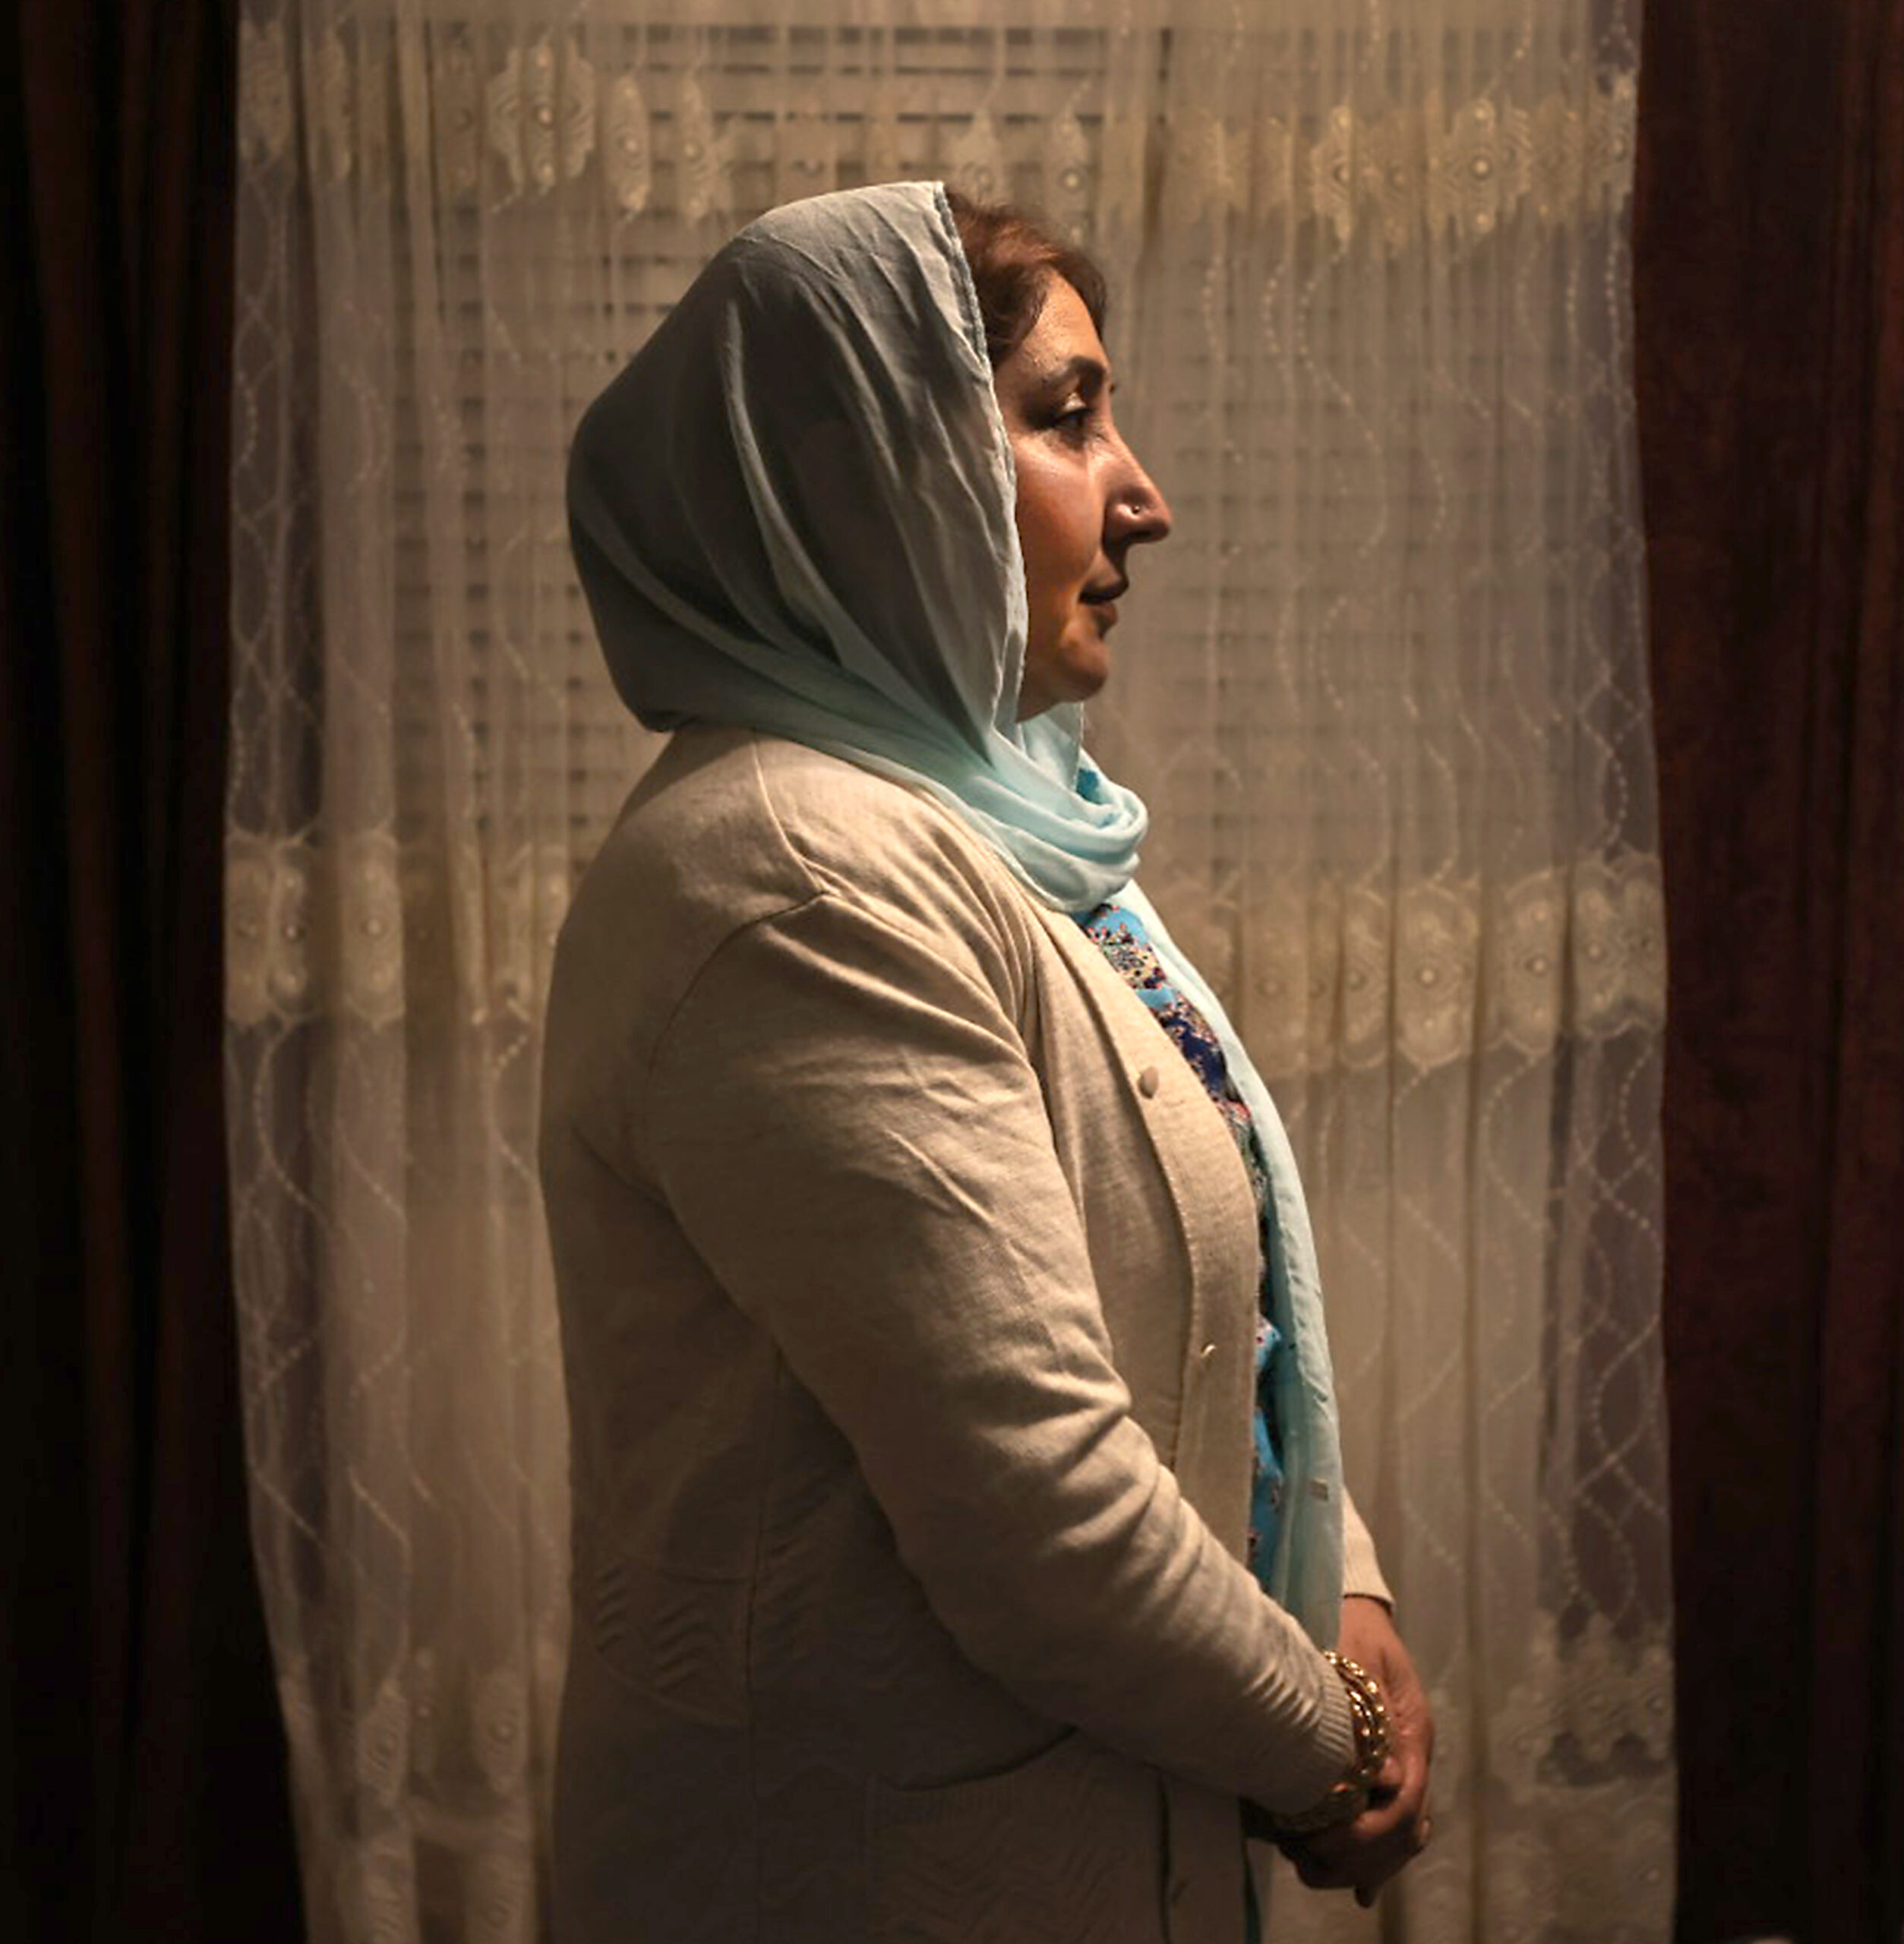 Matriarch Zakiah Sayed Osman, originally from Afghanistan, dreams of reuniting her youngest daughter, who is still living in Kabul, with the rest of her family in the U.S. (Kent Porter / The Press Democrat)